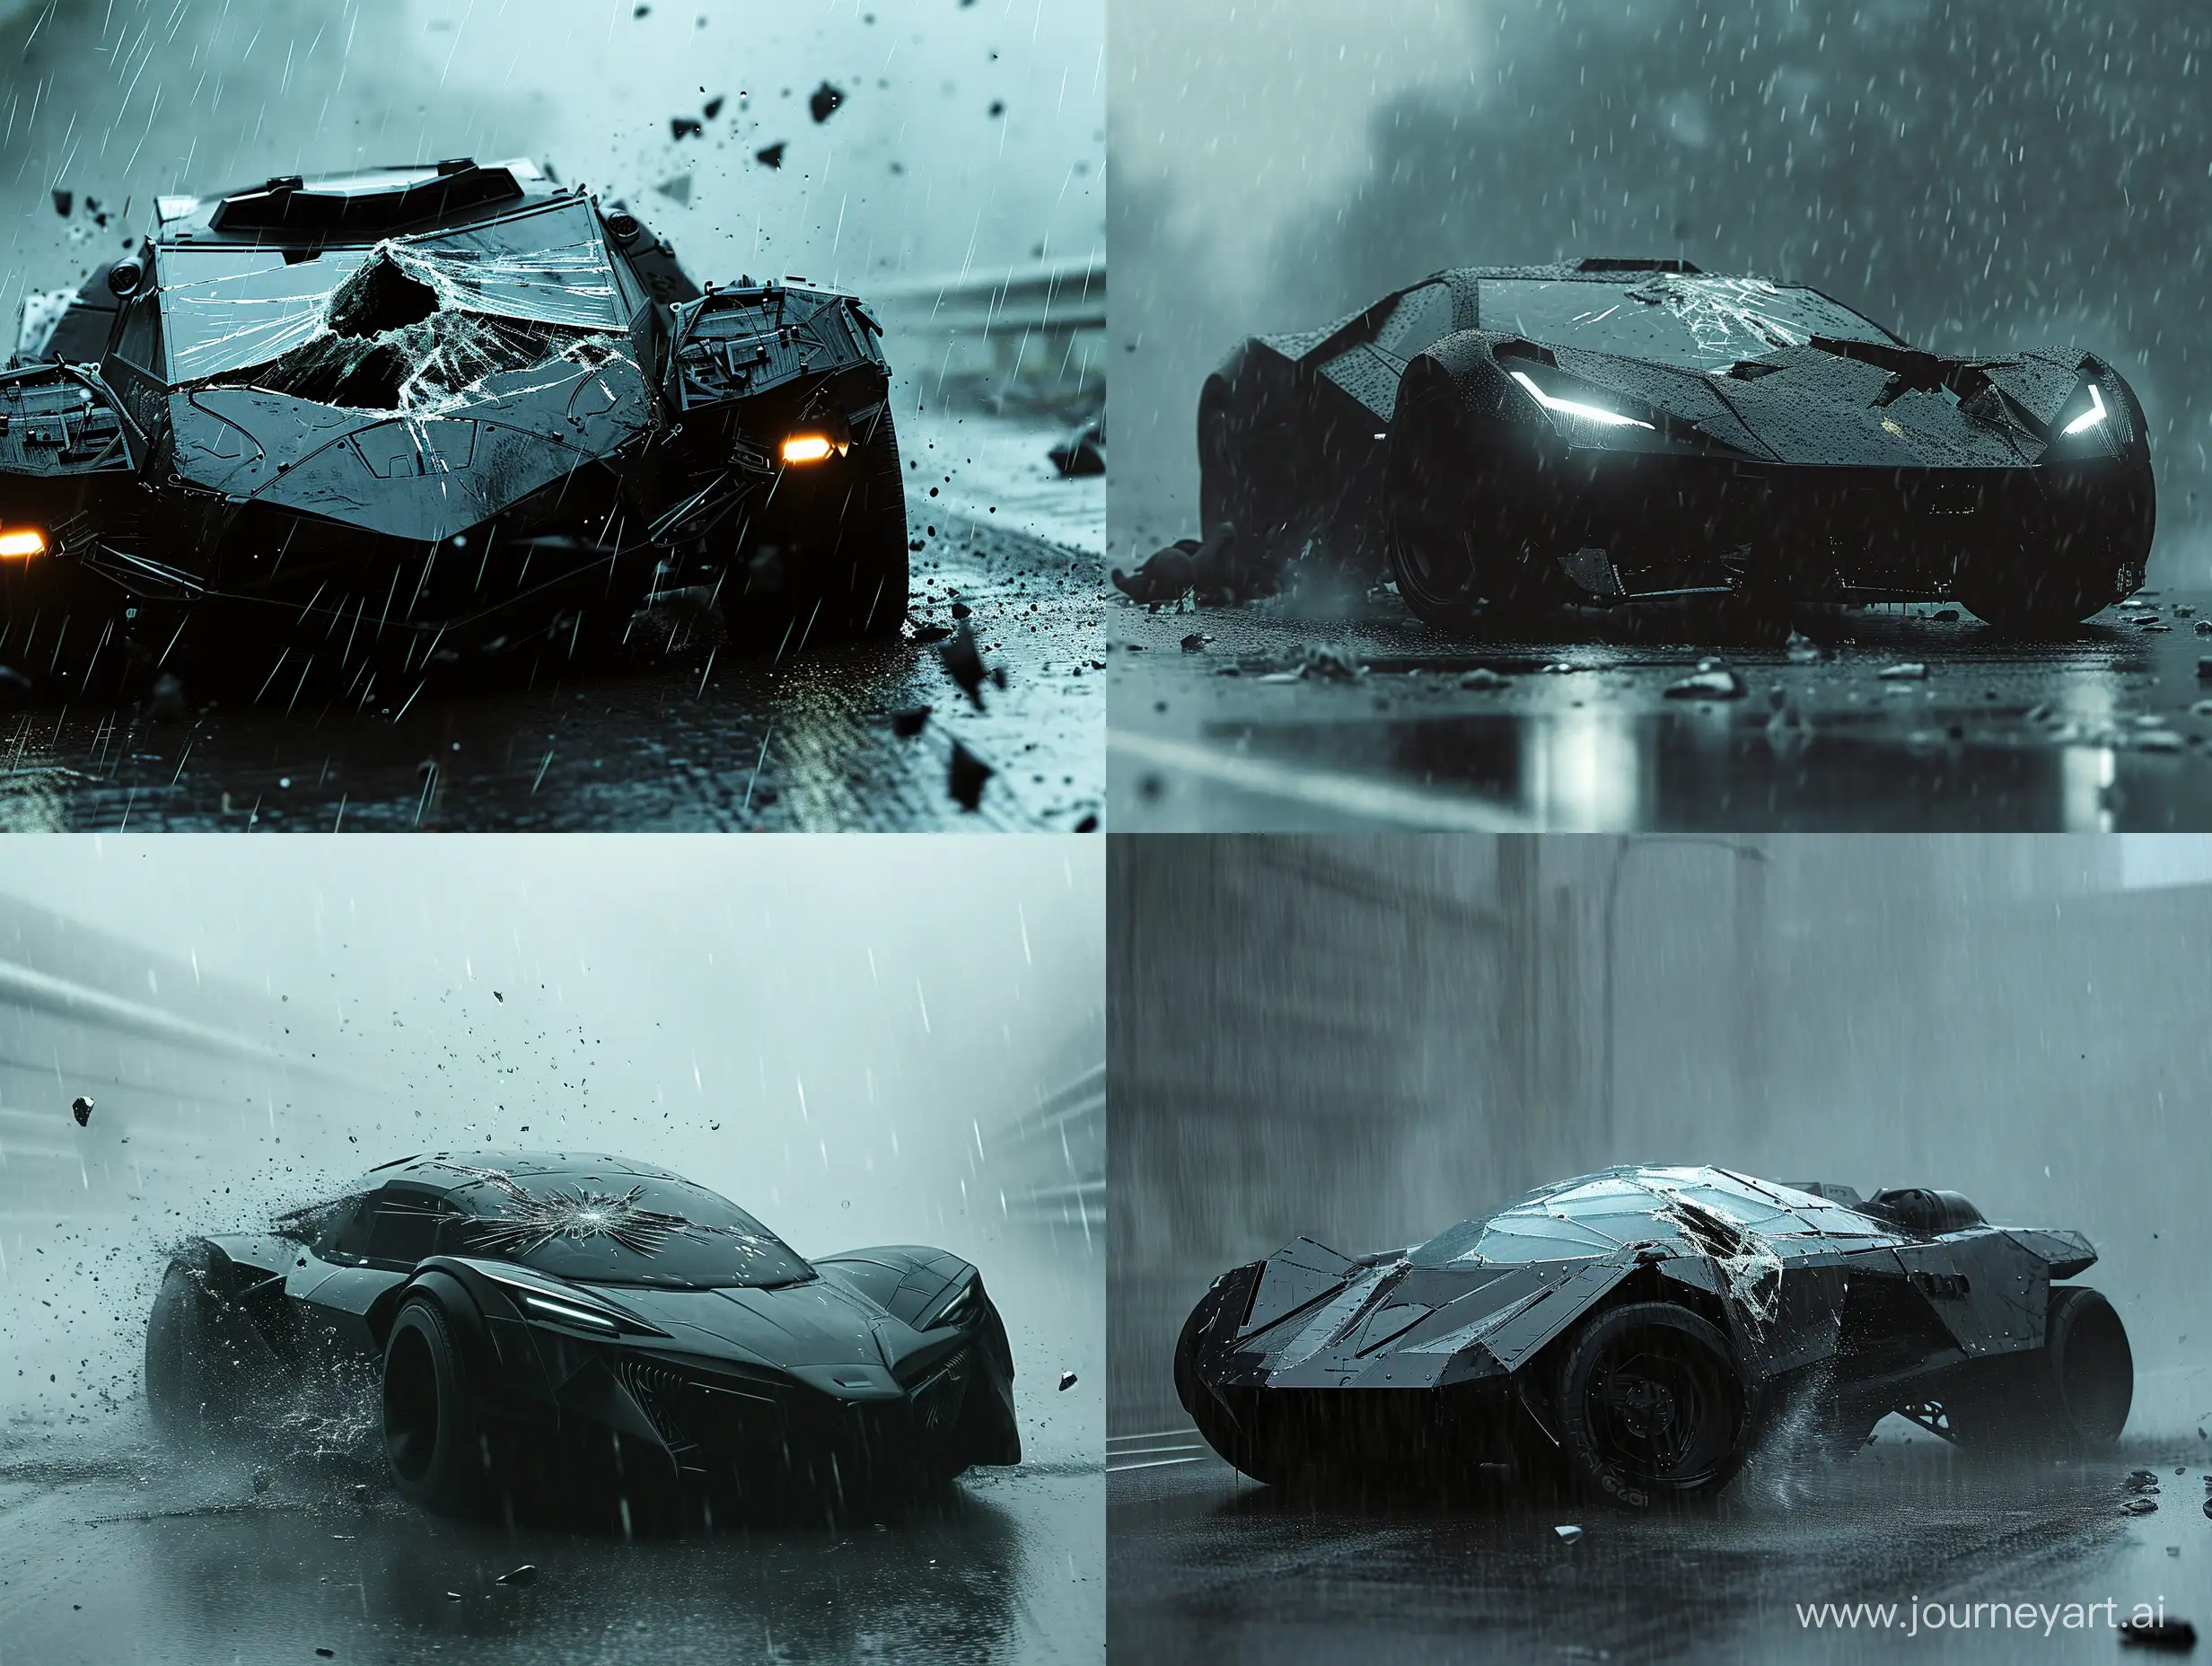 cinematic, movie shot, black armored sci fi car, chase, action shot, smashed windshield, dark rain, tlou style, inspired by Gregory Crewdson, conceptual art, fog day